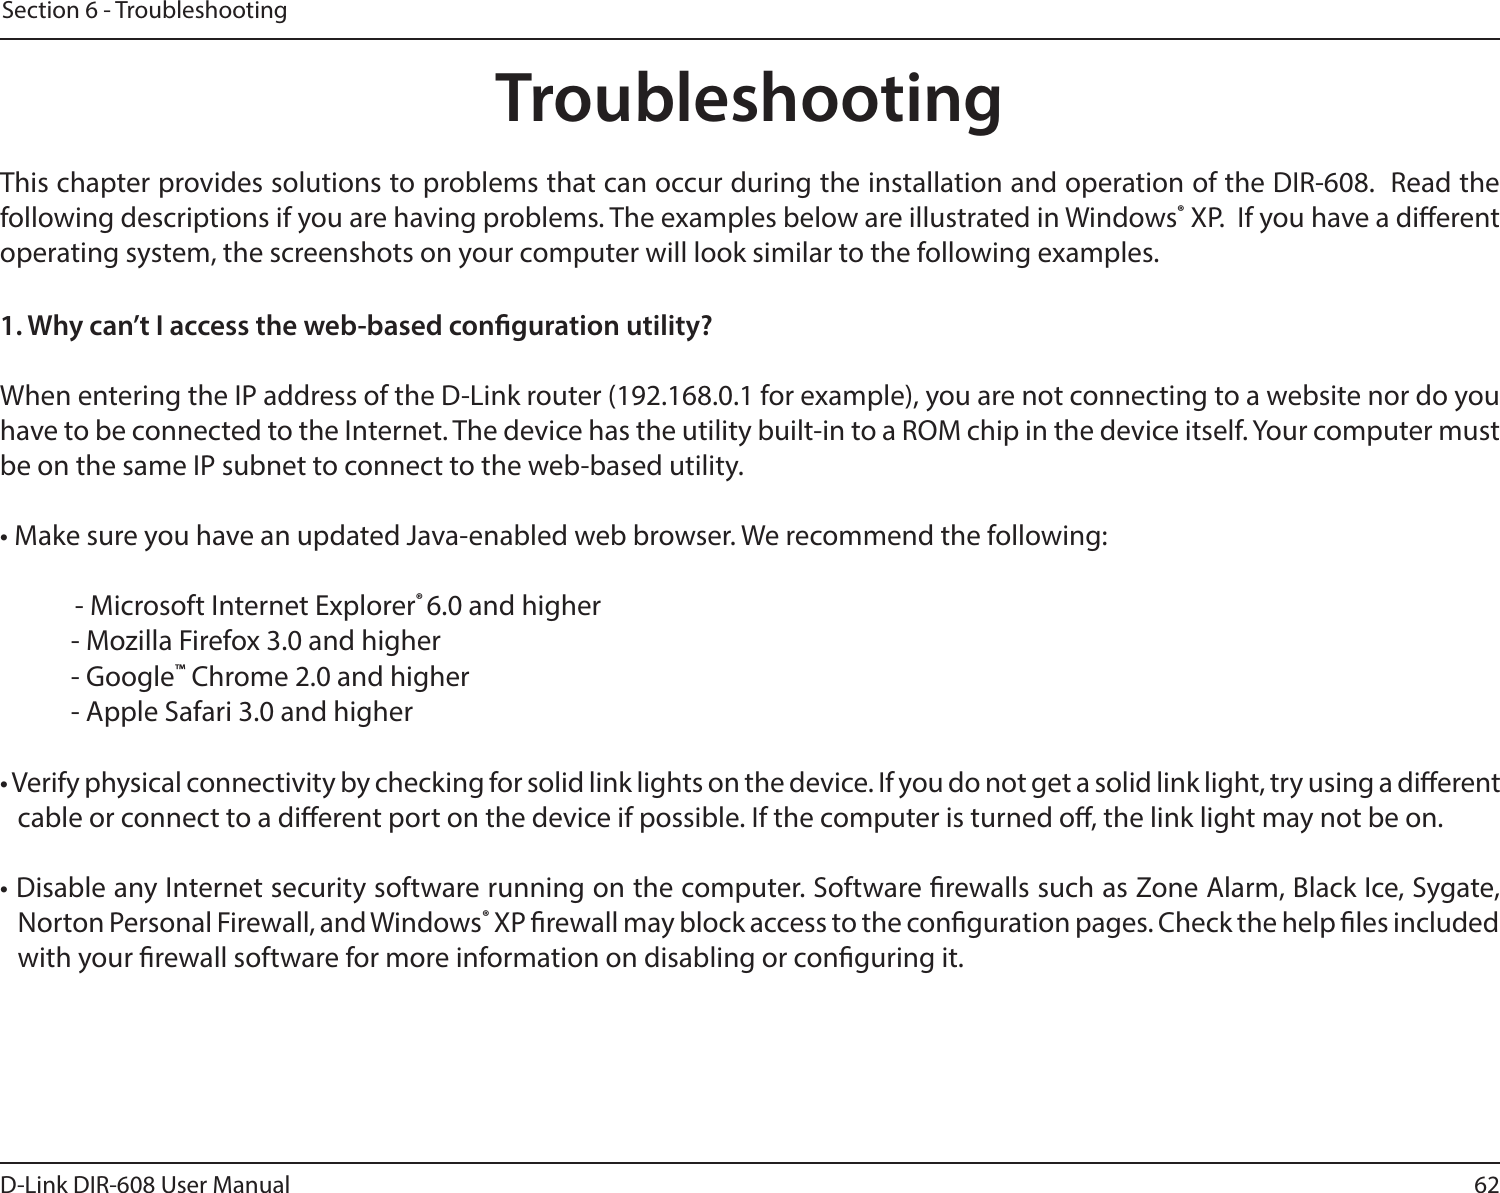 62D-Link DIR-608 User ManualSection 6 - TroubleshootingTroubleshootingThis chapter provides solutions to problems that can occur during the installation and operation of the DIR-608.  Read the following descriptions if you are having problems. The examples below are illustrated in Windows® XP.  If you have a dierent operating system, the screenshots on your computer will look similar to the following examples.1. Why can’t I access the web-based conguration utility?When entering the IP address of the D-Link router (192.168.0.1 for example), you are not connecting to a website nor do you have to be connected to the Internet. The device has the utility built-in to a ROM chip in the device itself. Your computer must be on the same IP subnet to connect to the web-based utility. • Make sure you have an updated Java-enabled web browser. We recommend the following:    - Microsoft Internet Explorer® 6.0 and higher- Mozilla Firefox 3.0 and higher- Google™ Chrome 2.0 and higher- Apple Safari 3.0 and higher• Verify physical connectivity by checking for solid link lights on the device. If you do not get a solid link light, try using a dierent cable or connect to a dierent port on the device if possible. If the computer is turned o, the link light may not be on.• Disable any Internet security software running on the computer. Software rewalls such as Zone Alarm, Black Ice, Sygate, Norton Personal Firewall, and Windows® XP rewall may block access to the conguration pages. Check the help les included with your rewall software for more information on disabling or conguring it.